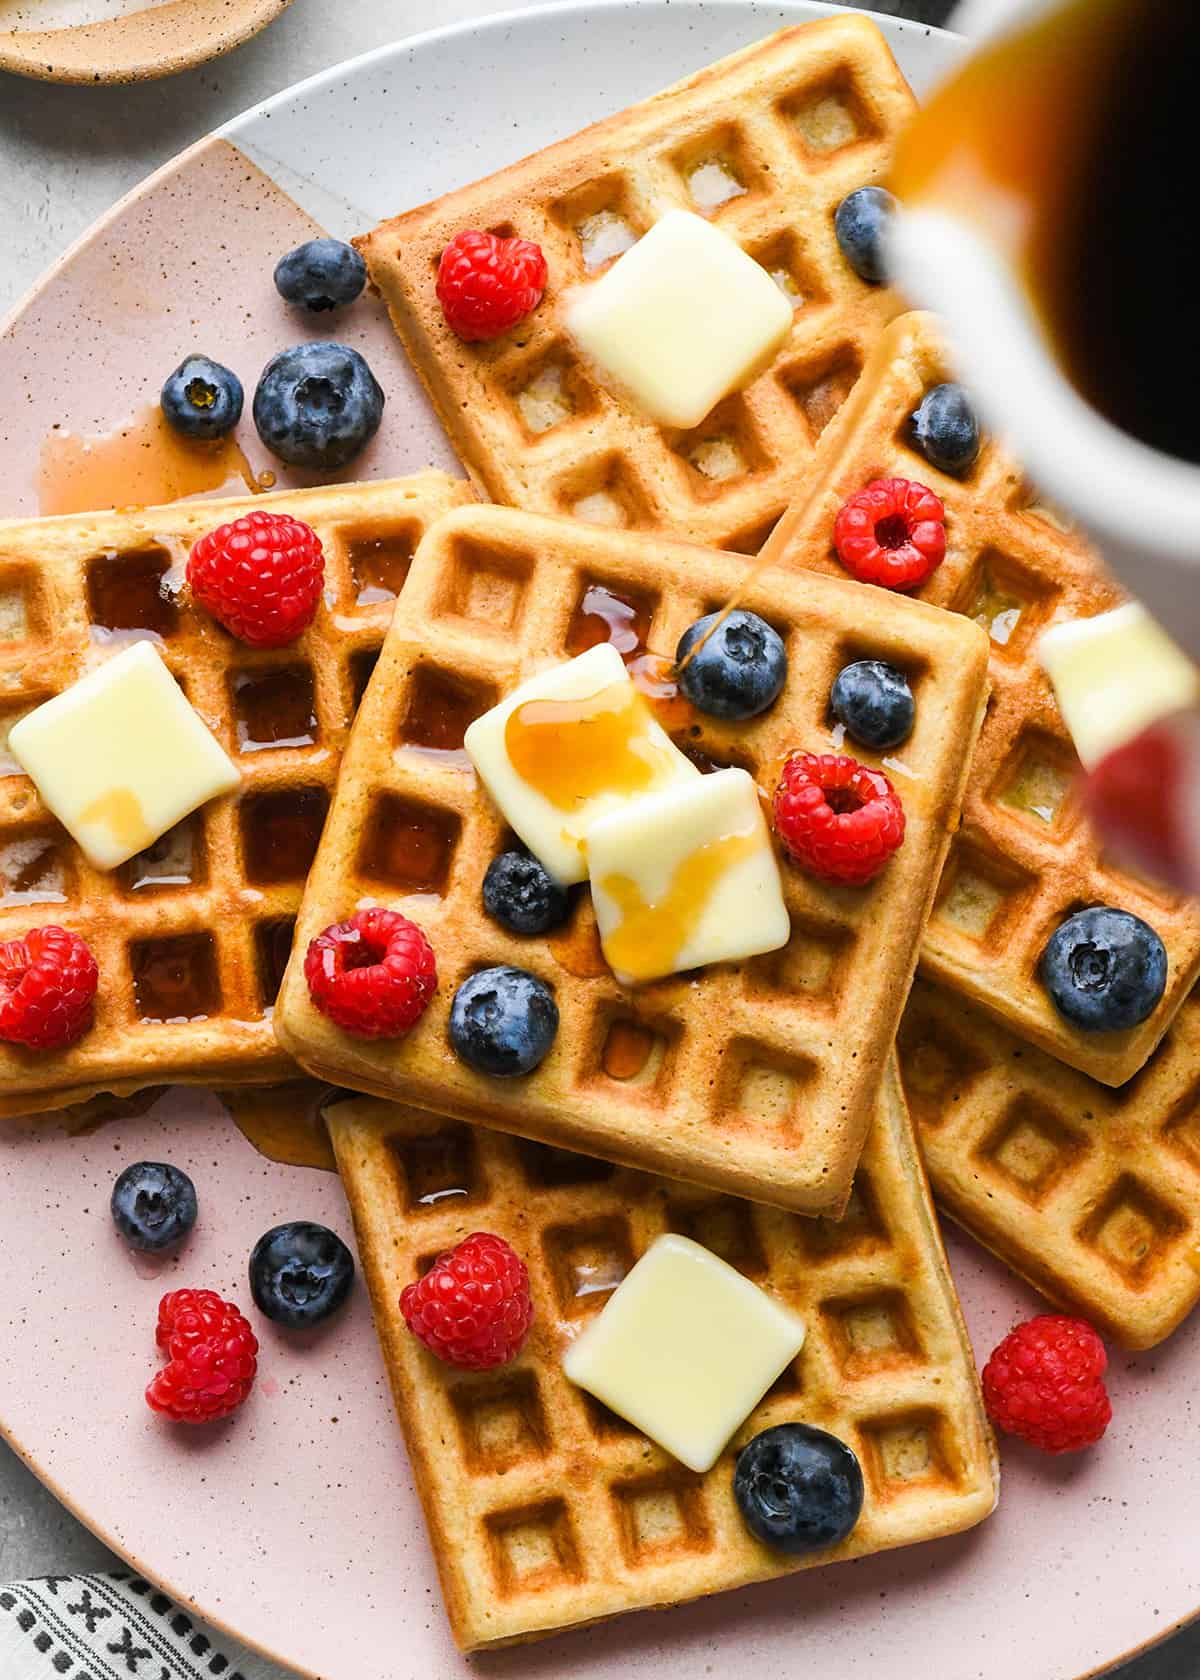 syrup being poured onto 6 Homemade Waffles on a plate topped with butter and berries